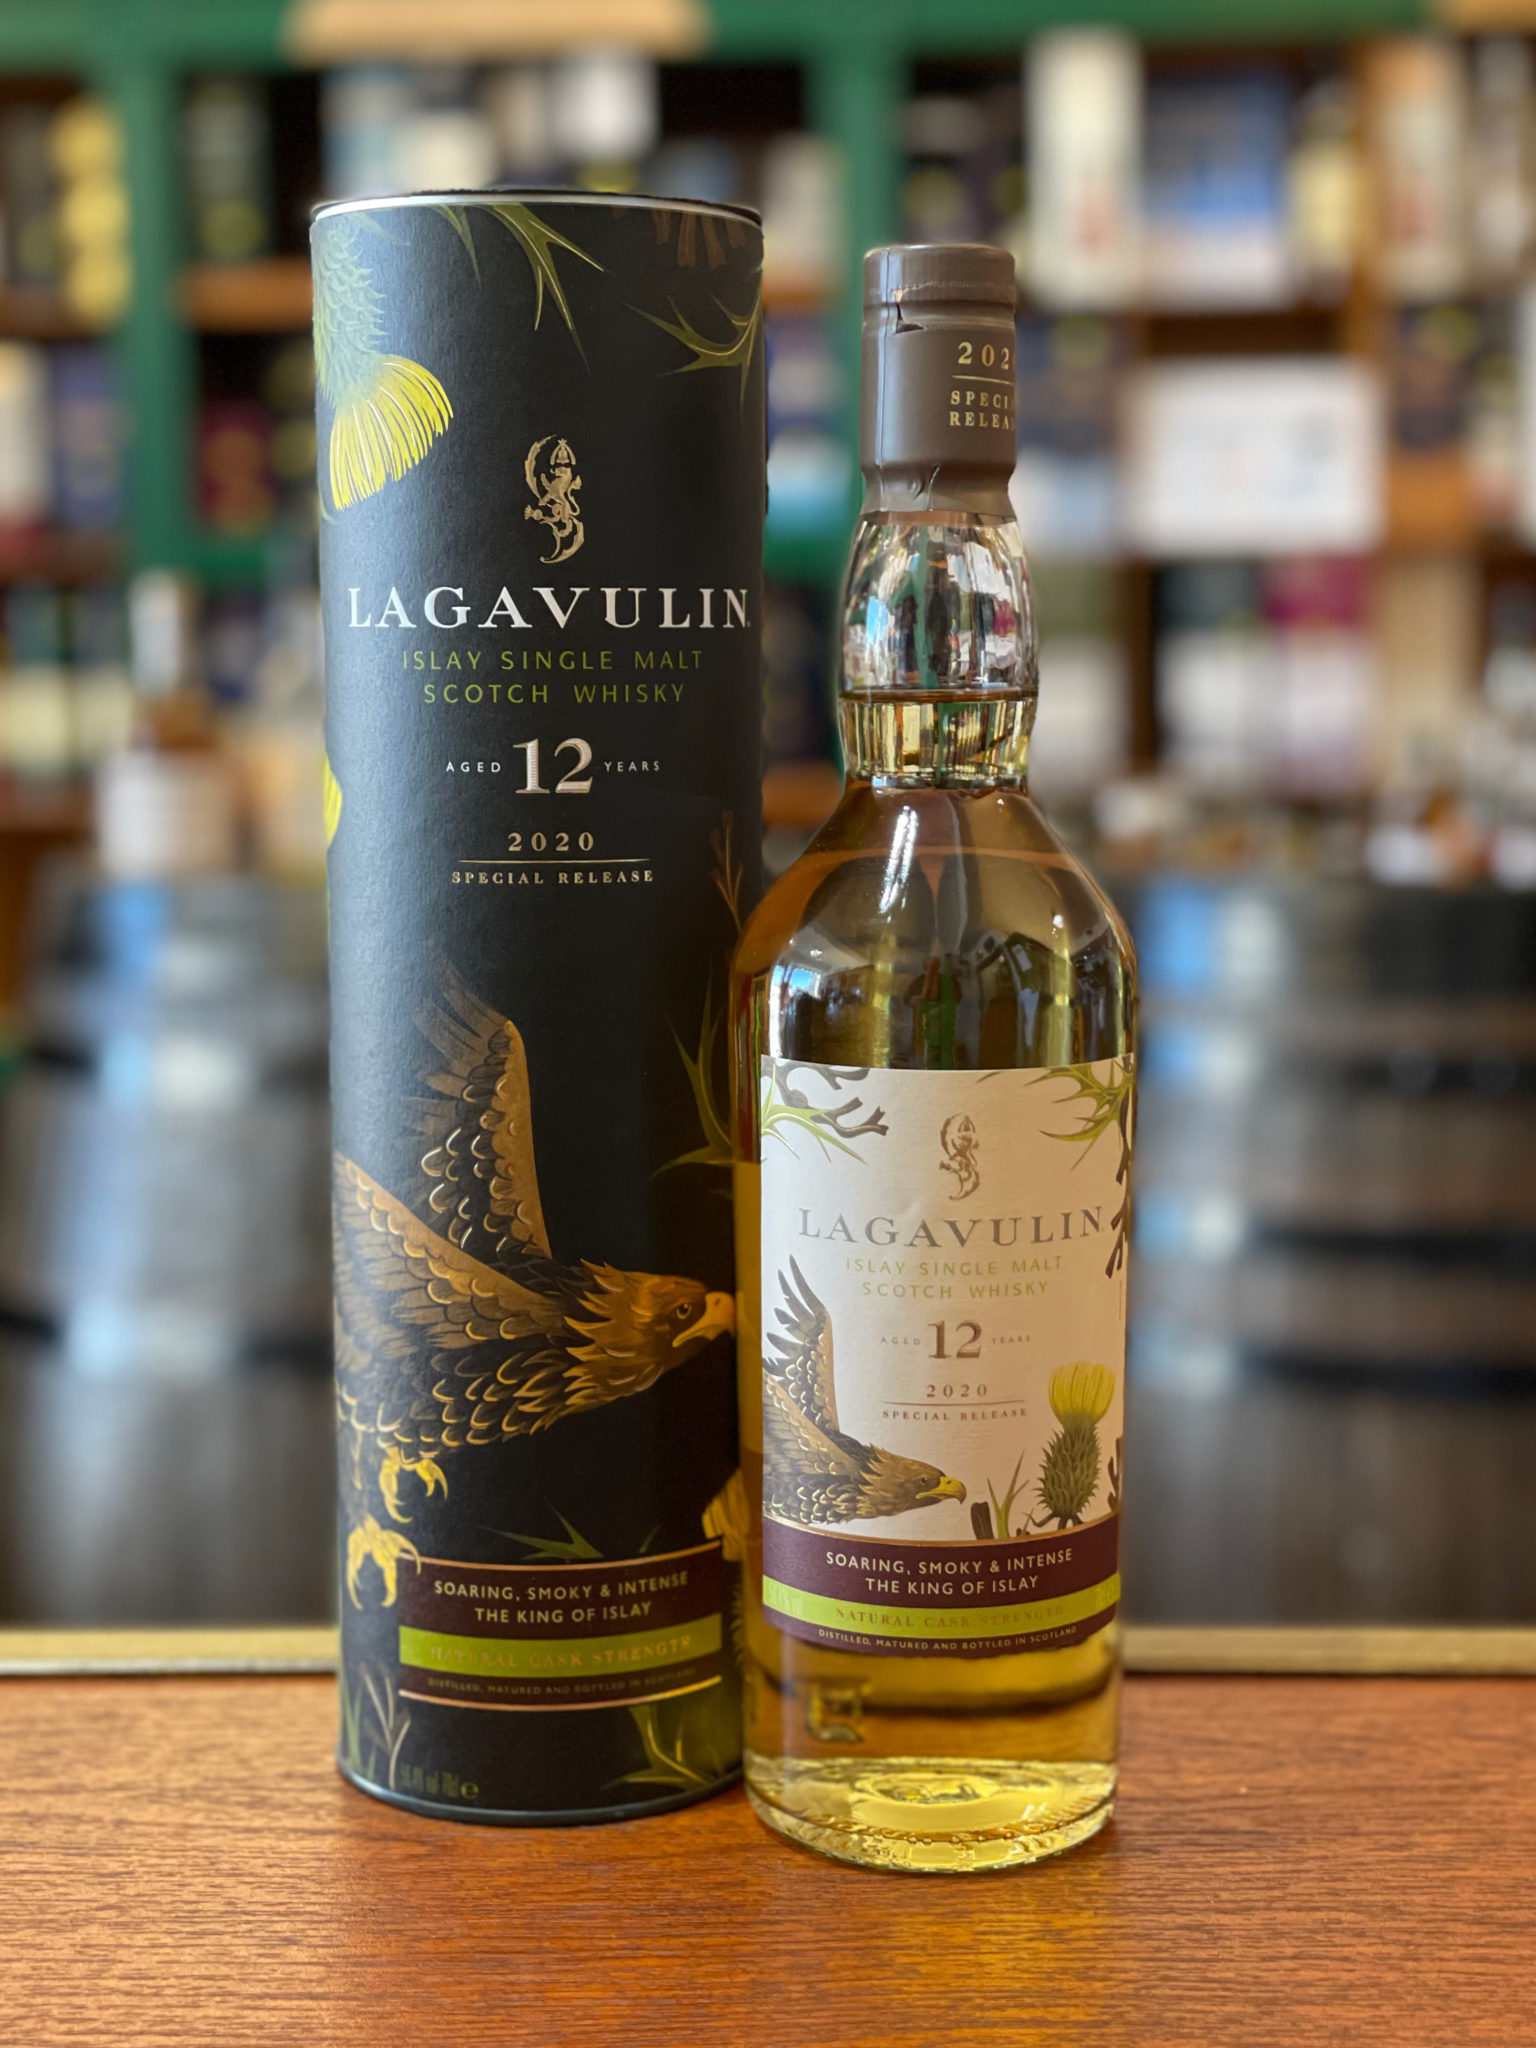 Lagavulin 12 Years Old 2020 Special Release Single Malt Scotch Whisky